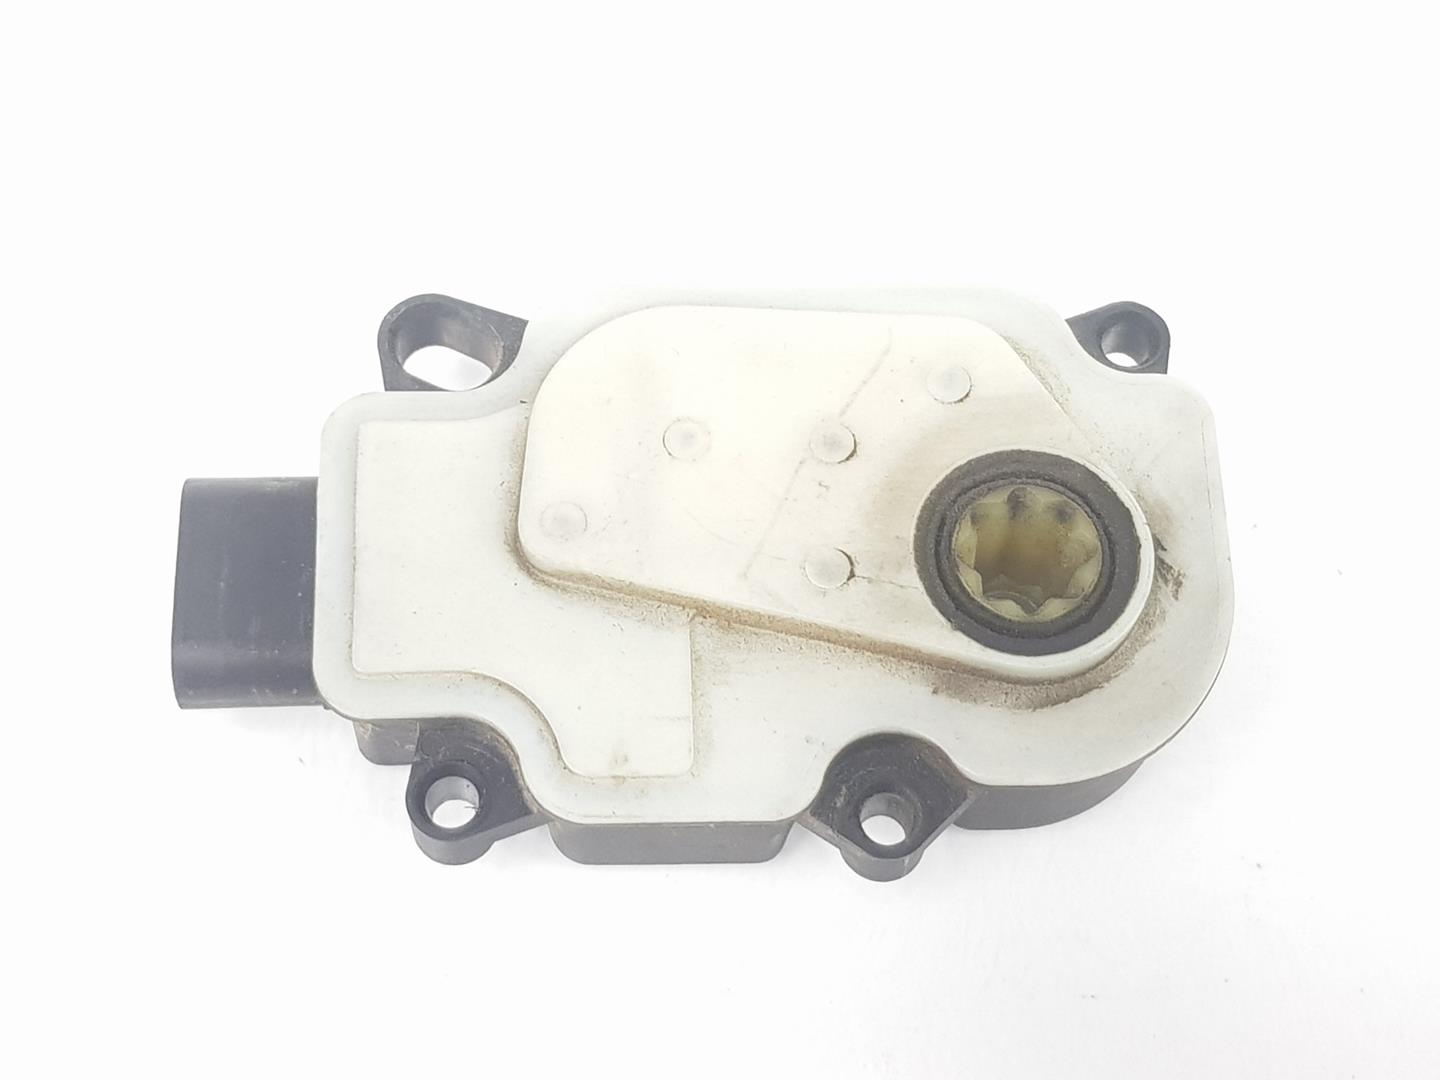 VOLVO V40 2 generation (2012-2020) Air Conditioner Air Flow Valve Motor DS738476BC, DS738476BC 24240487